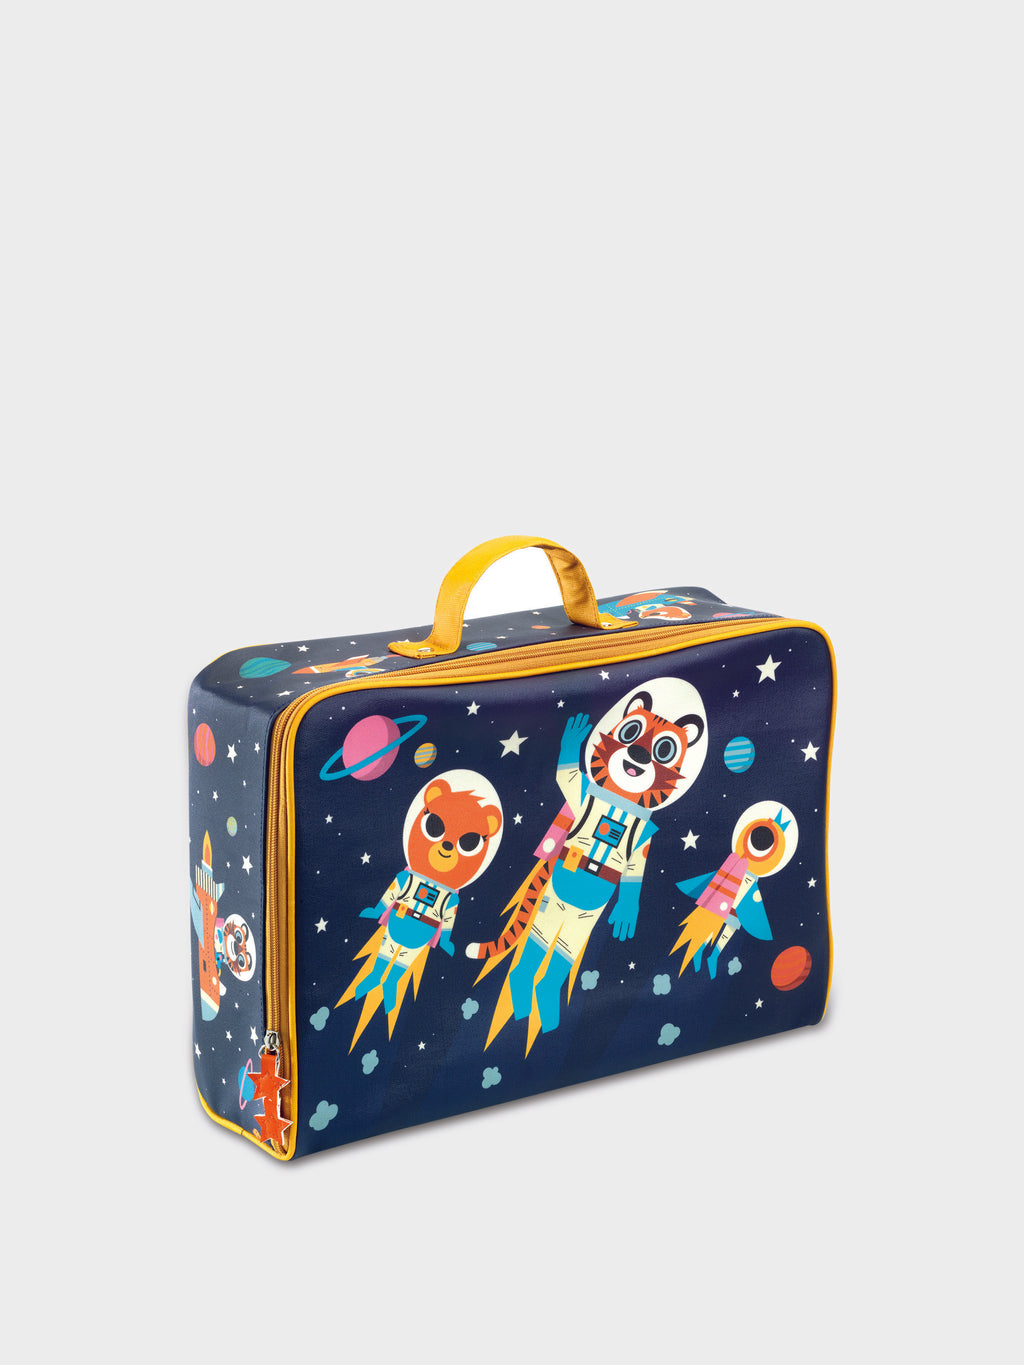 Blue suitcase for kids with space print